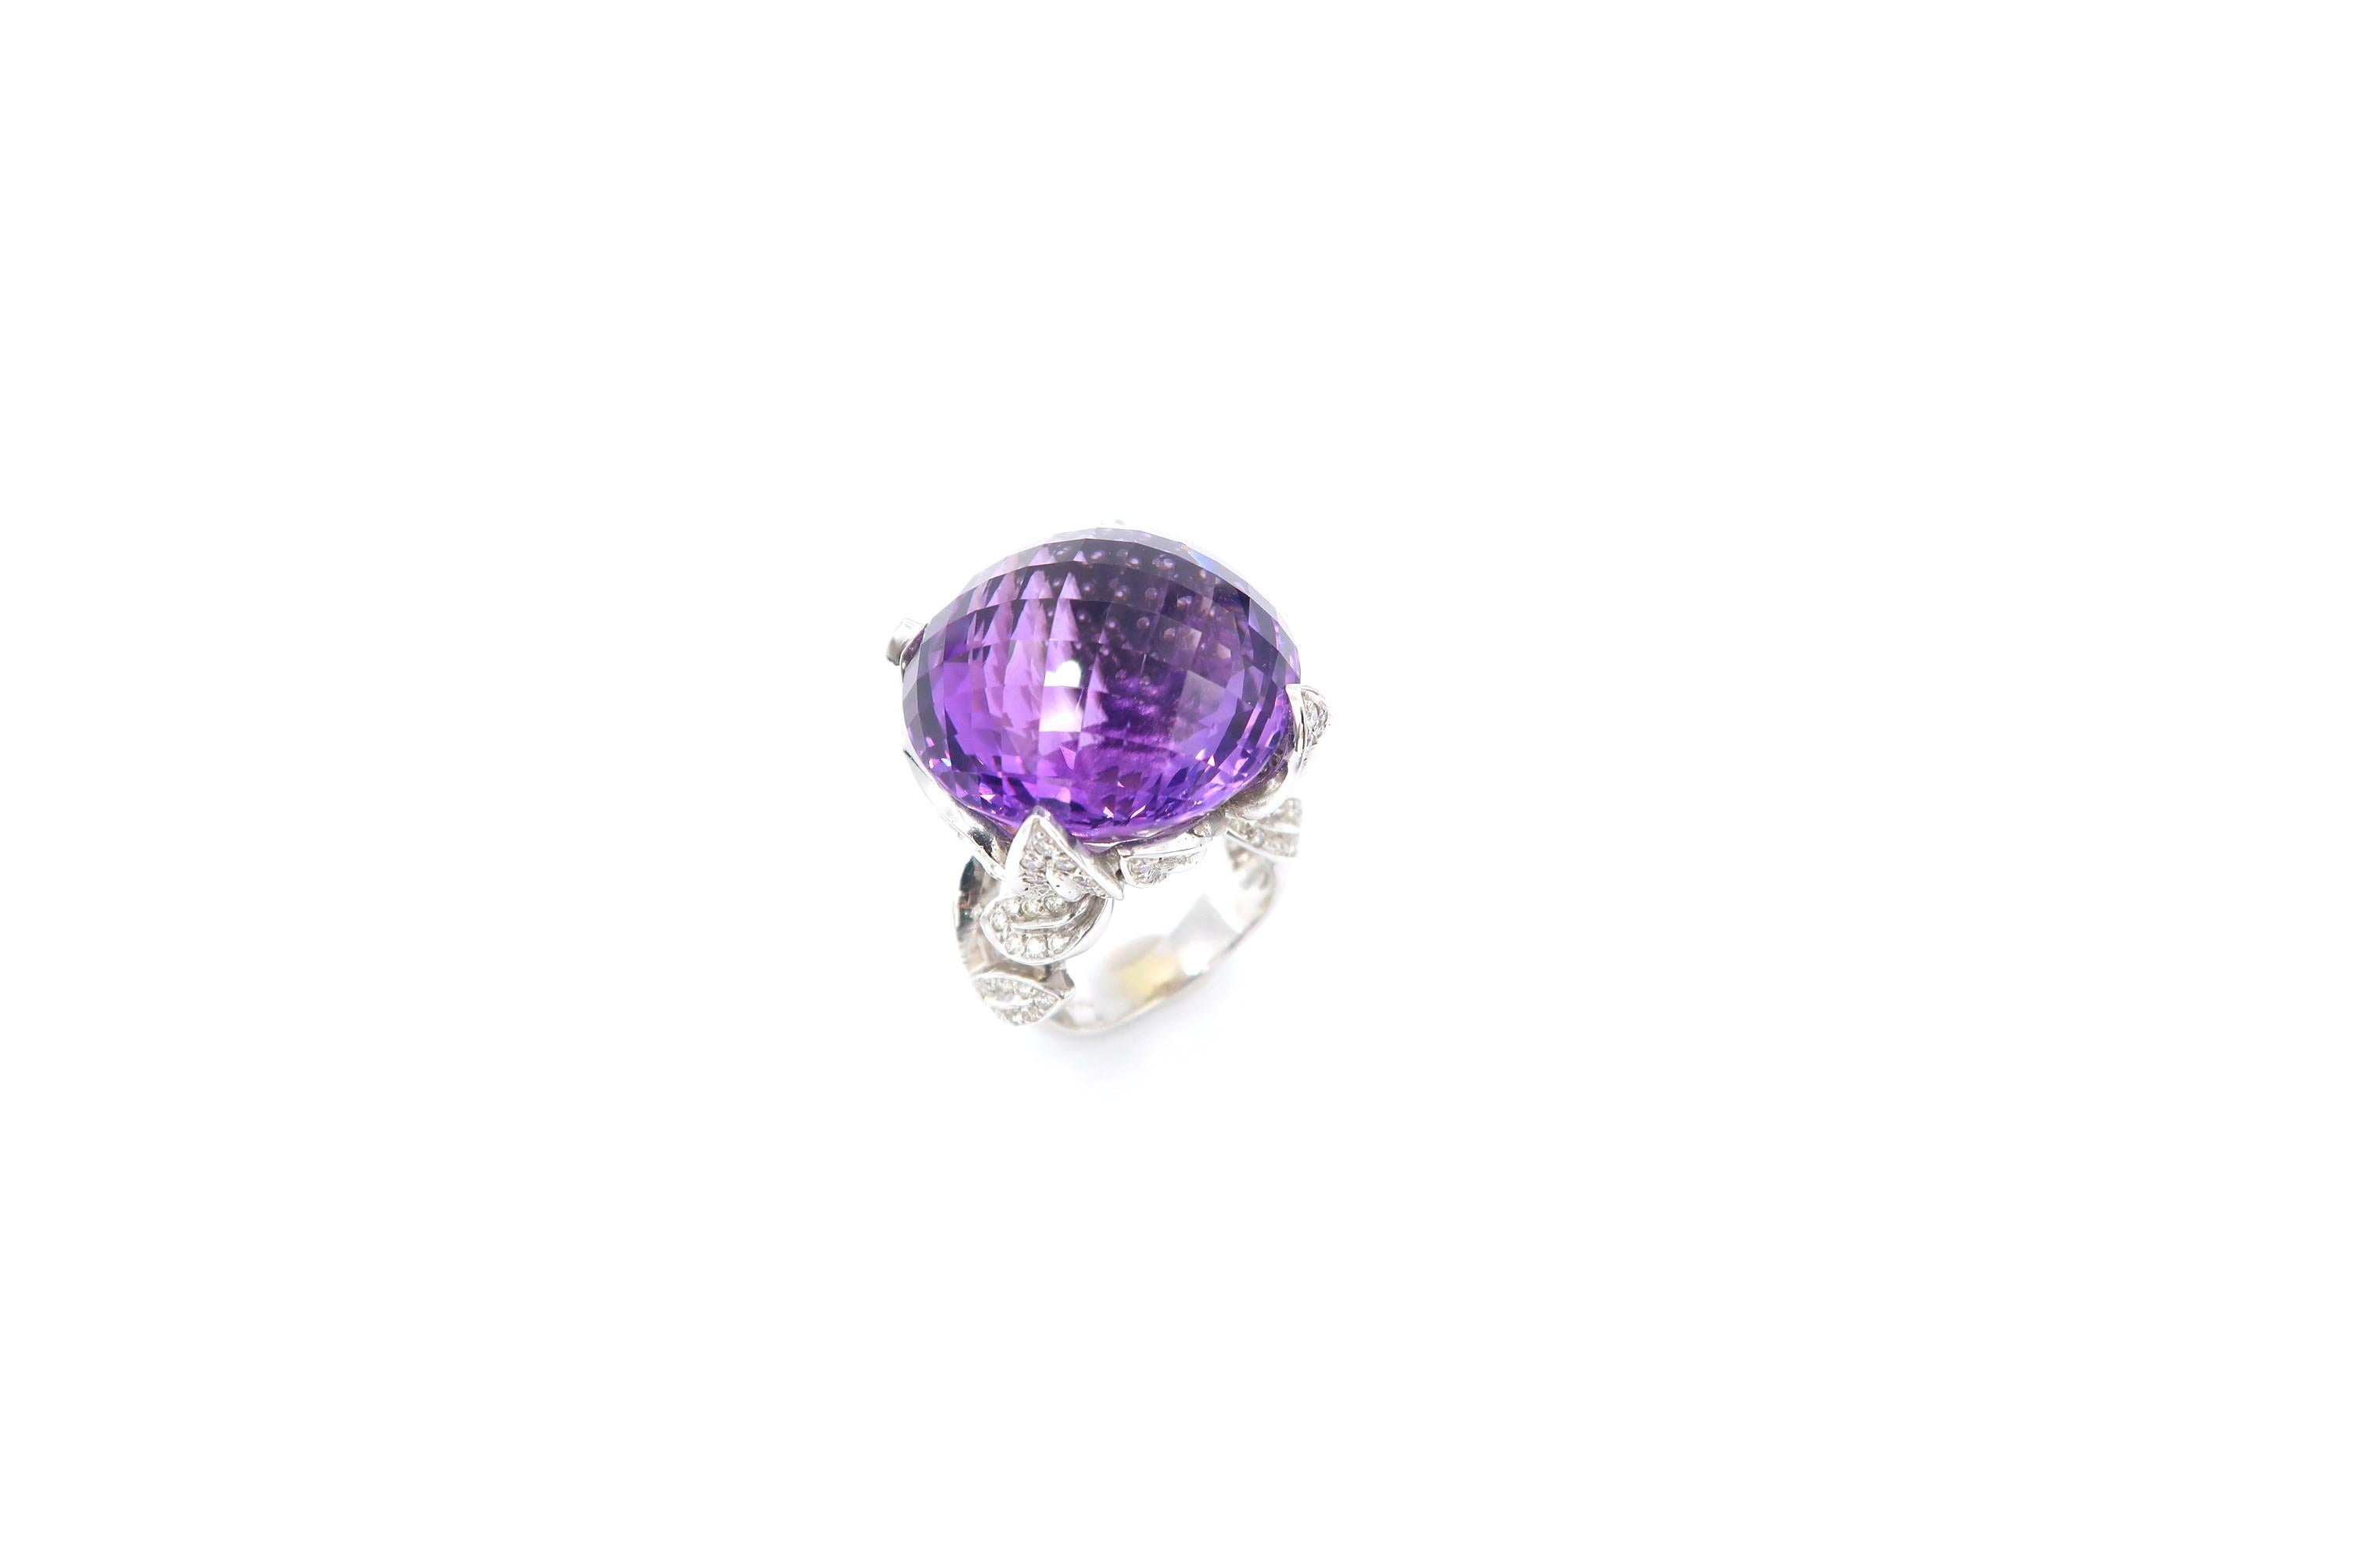 53.26 Carat Special-Cut Amethyst Ring in 18K Gold with Diamond Pavé Olive Leaves Detail

Amethyst: 53.26cts.
Diamond: 1.99ct.
Gold: 18K Gold 19.438g.

Ring size: 55 / US 7
Please let us know should you wish to have the ring resized.